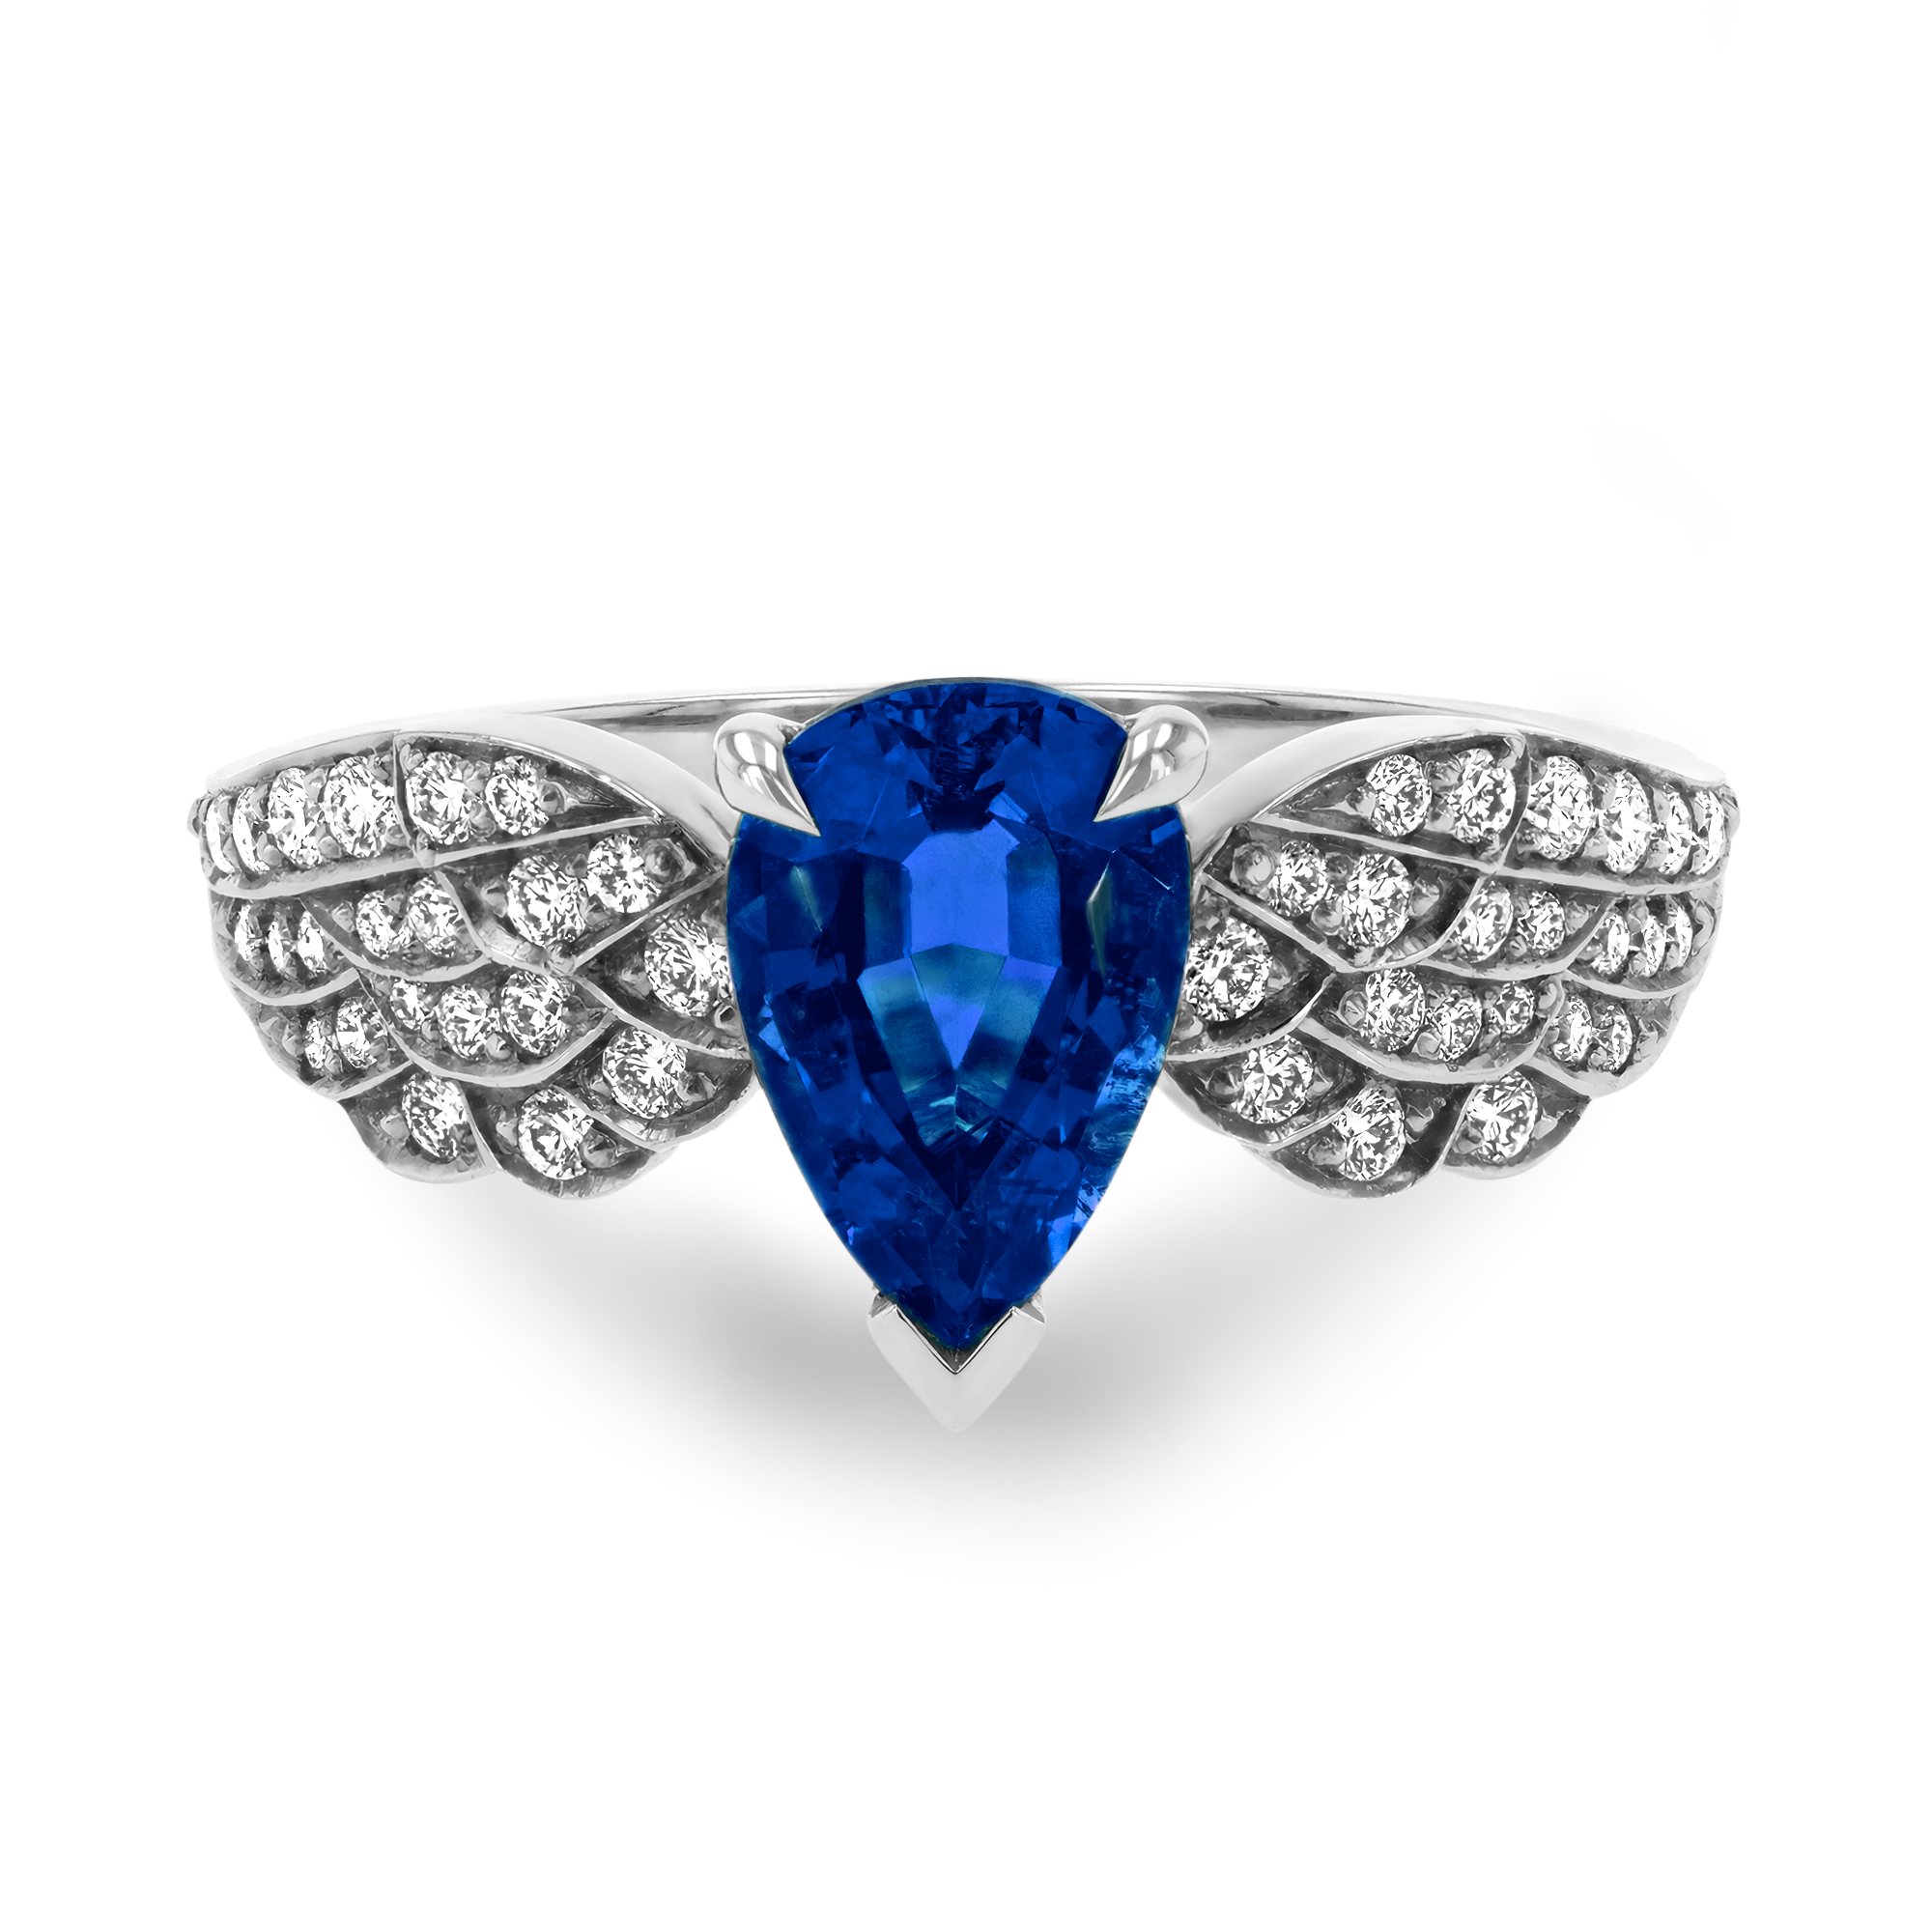 Tiara 1.17ct Sapphire Solitaire Ring Pearshape, Claw Set_2